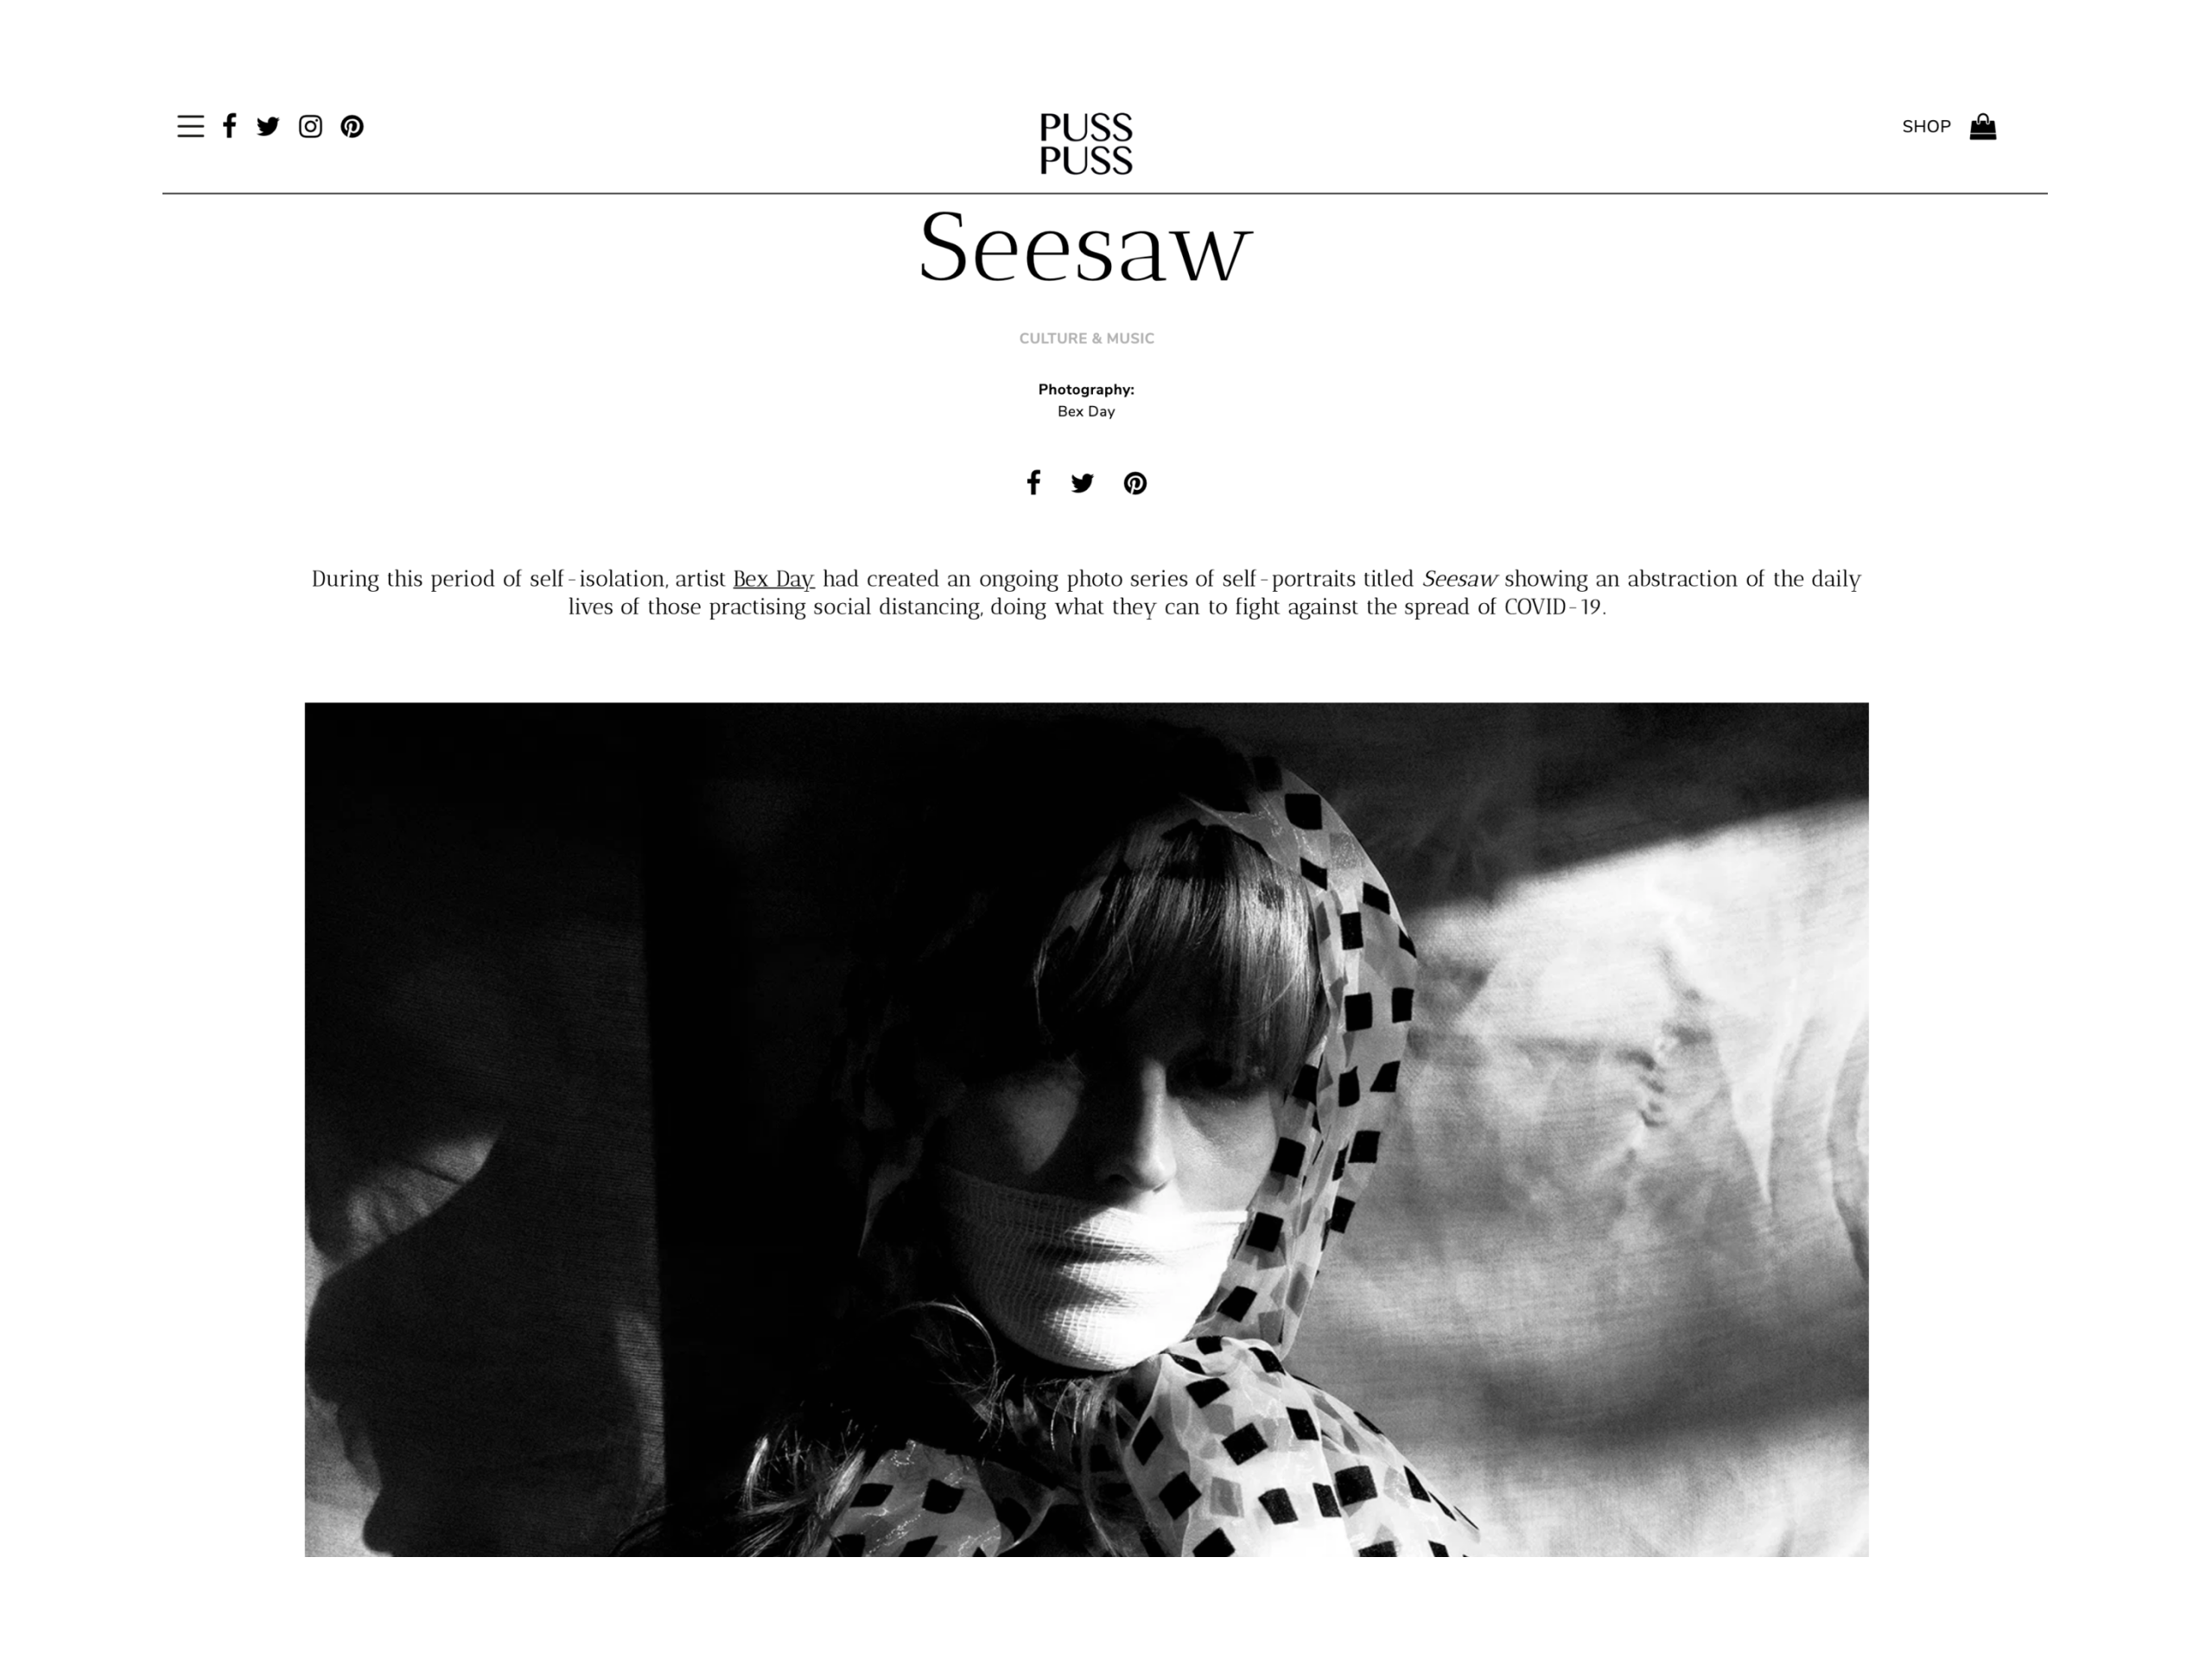 Puss Puss Magazine features Seesaw series by Bex Day